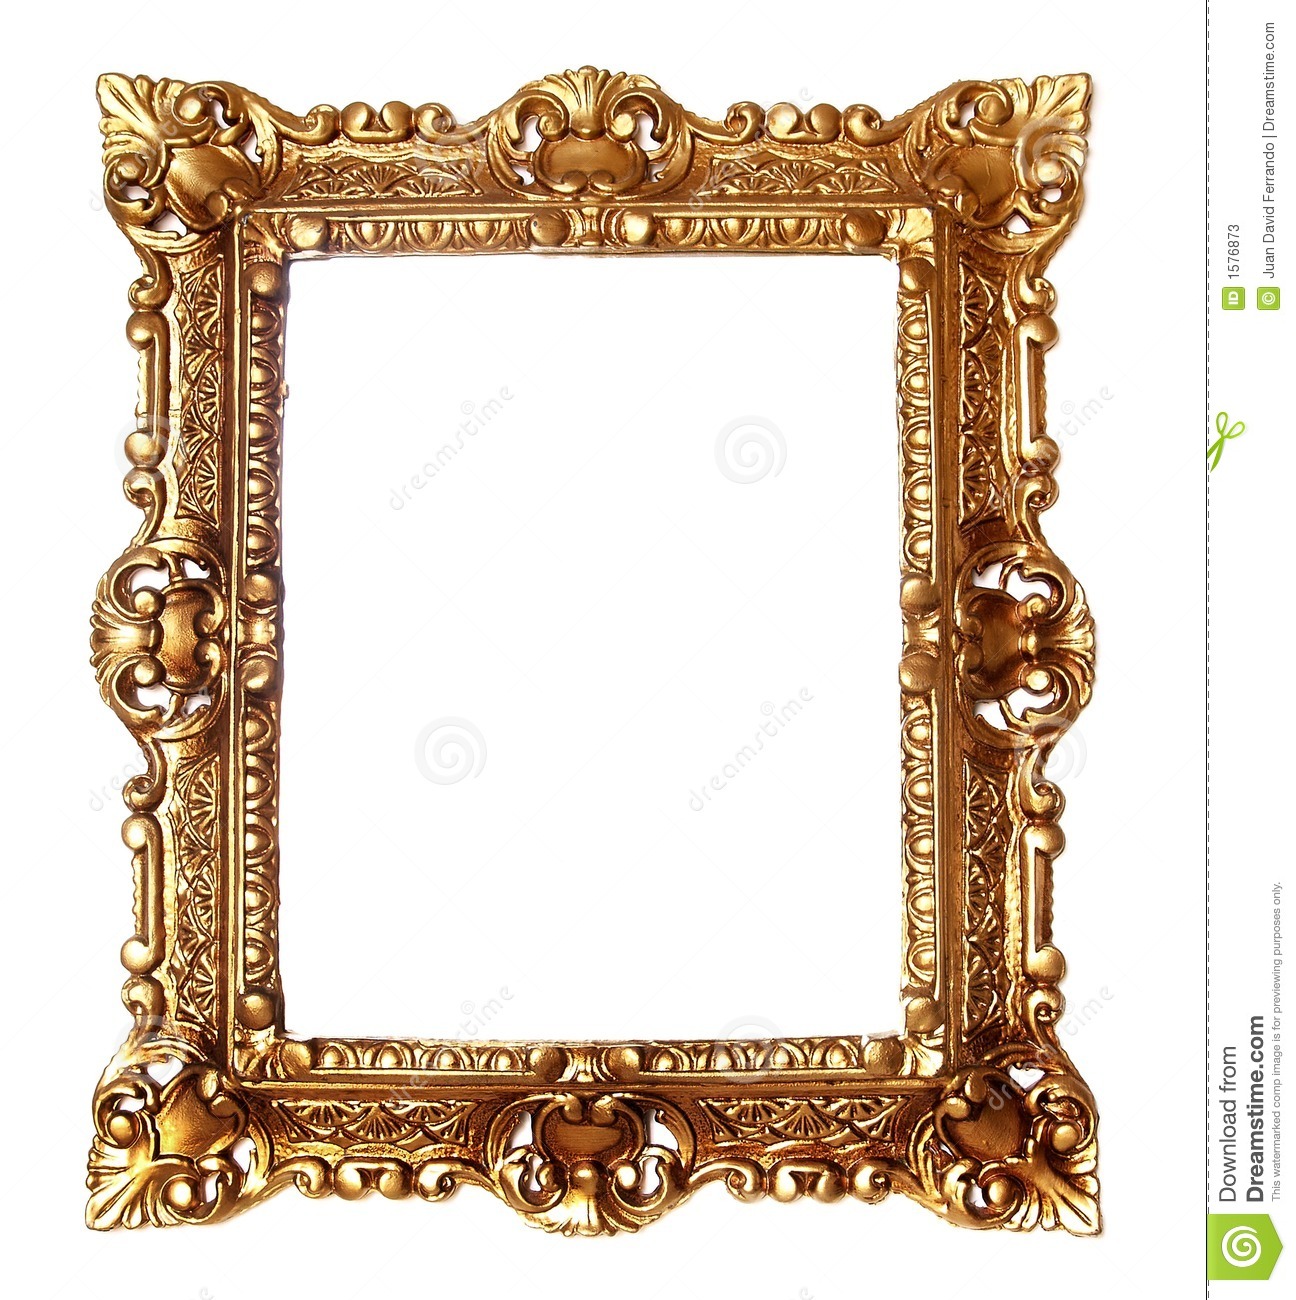 Antique Frame Clipart Gold   Clipart Panda   Free Clipart Images